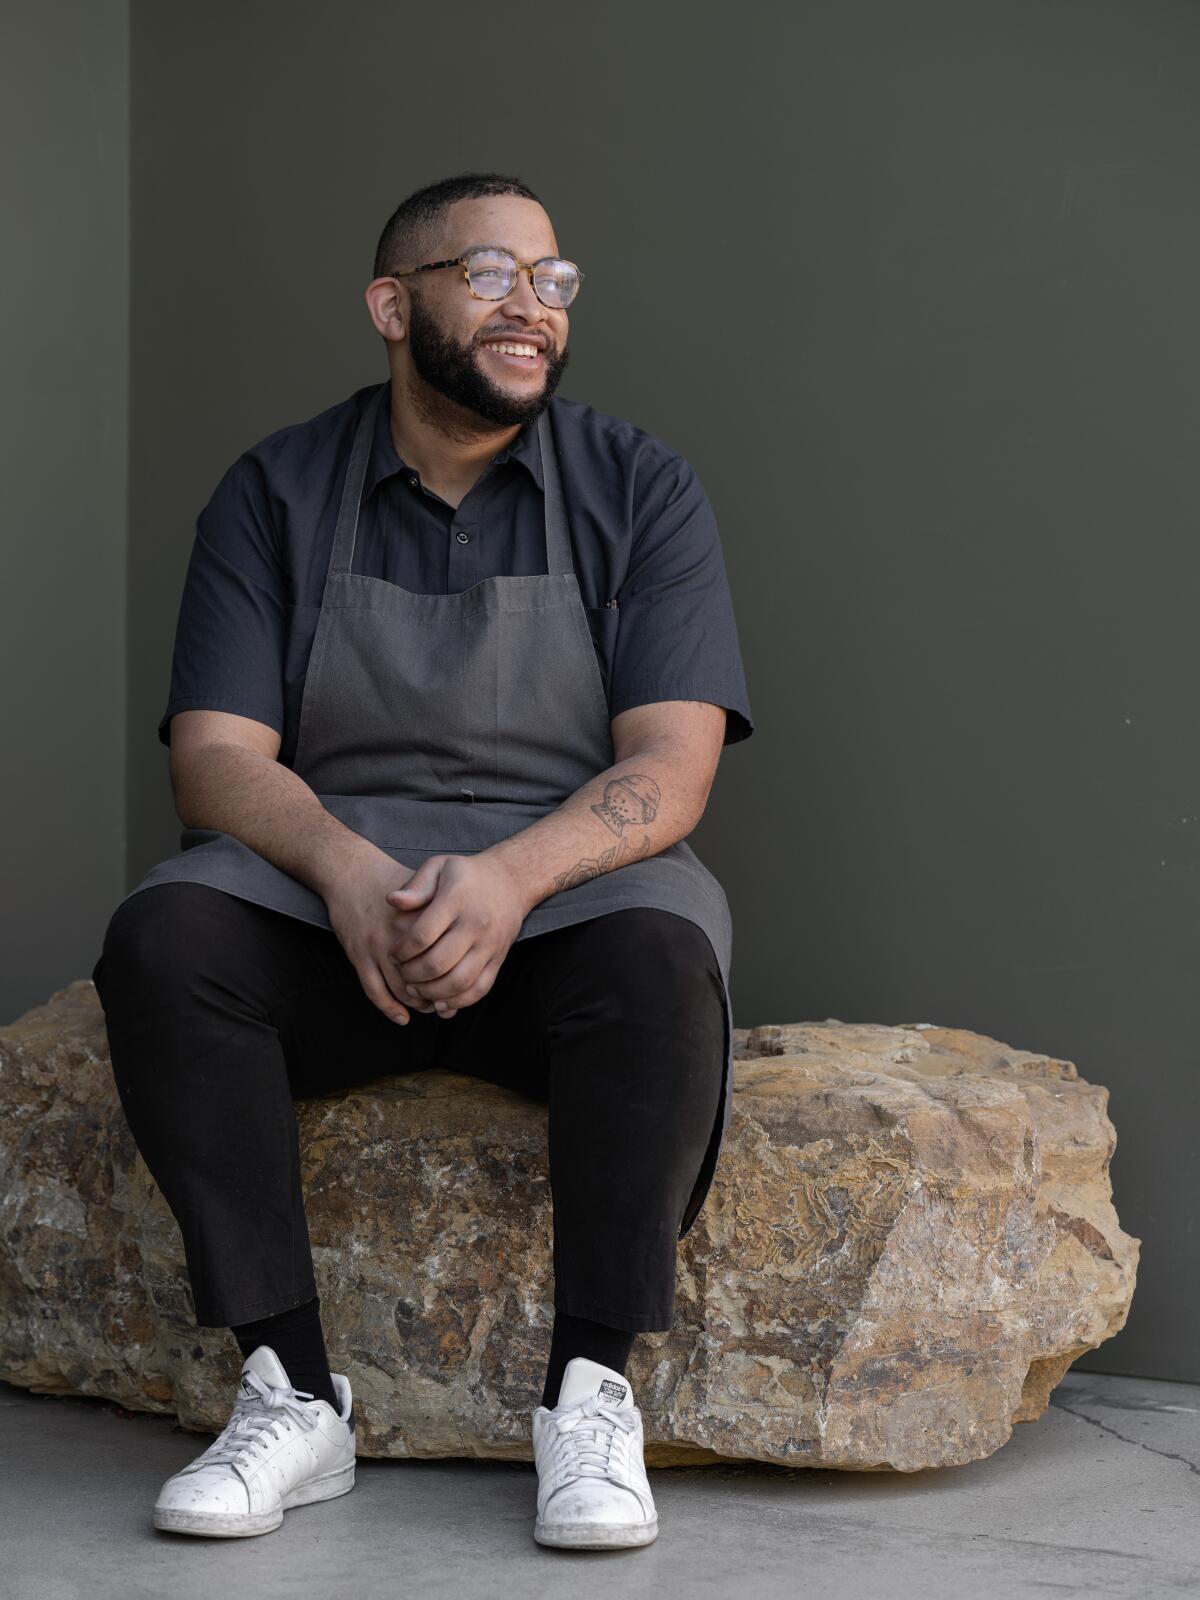 Josh Ulmer, a man in a chef's apron and glasses, sits on a large rock.